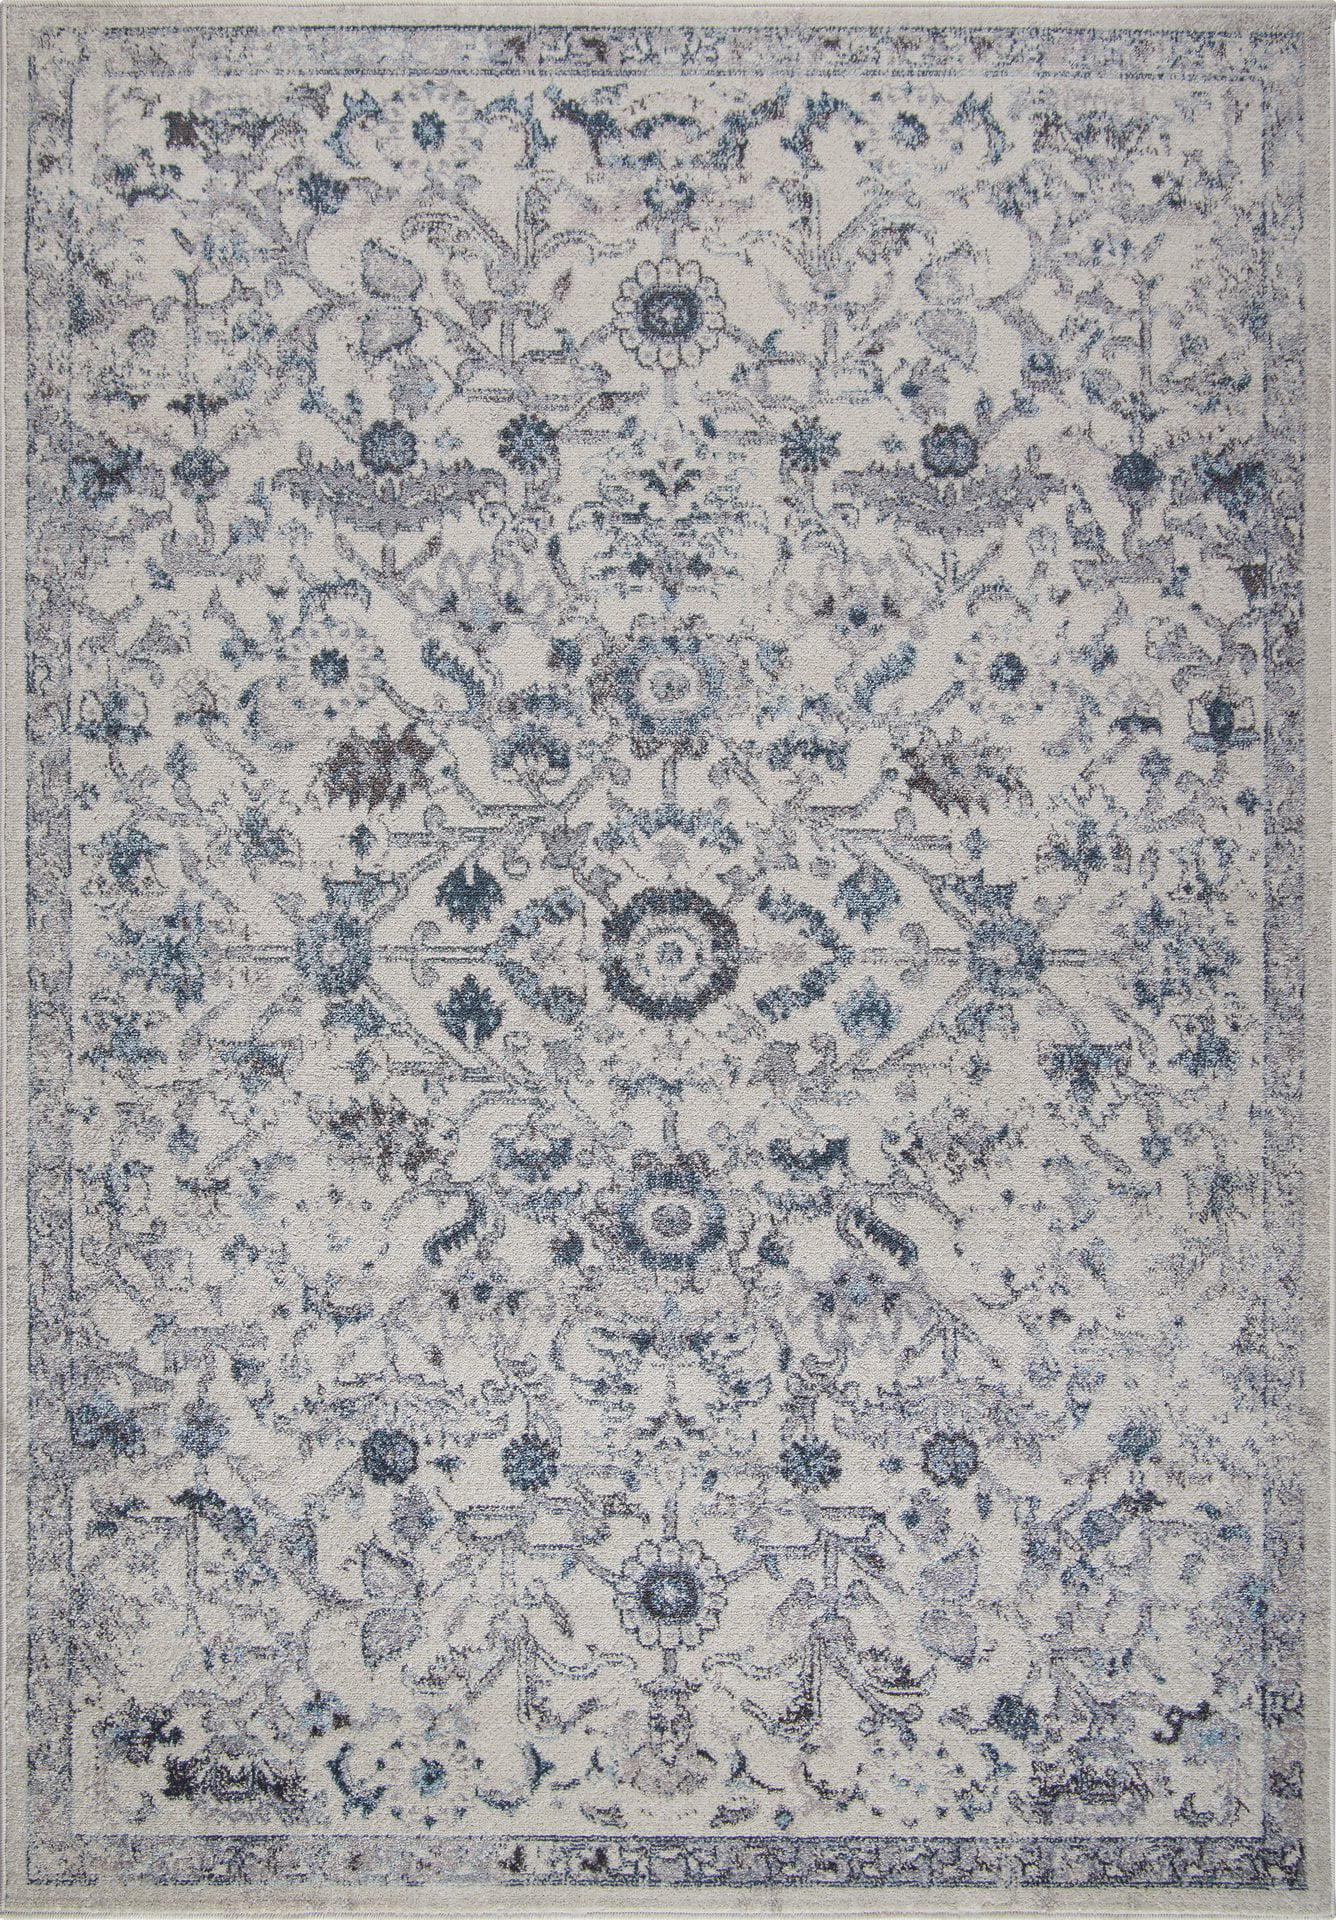 Ladole Rugs Arwen Traditional Style, Cream Colored Rugs